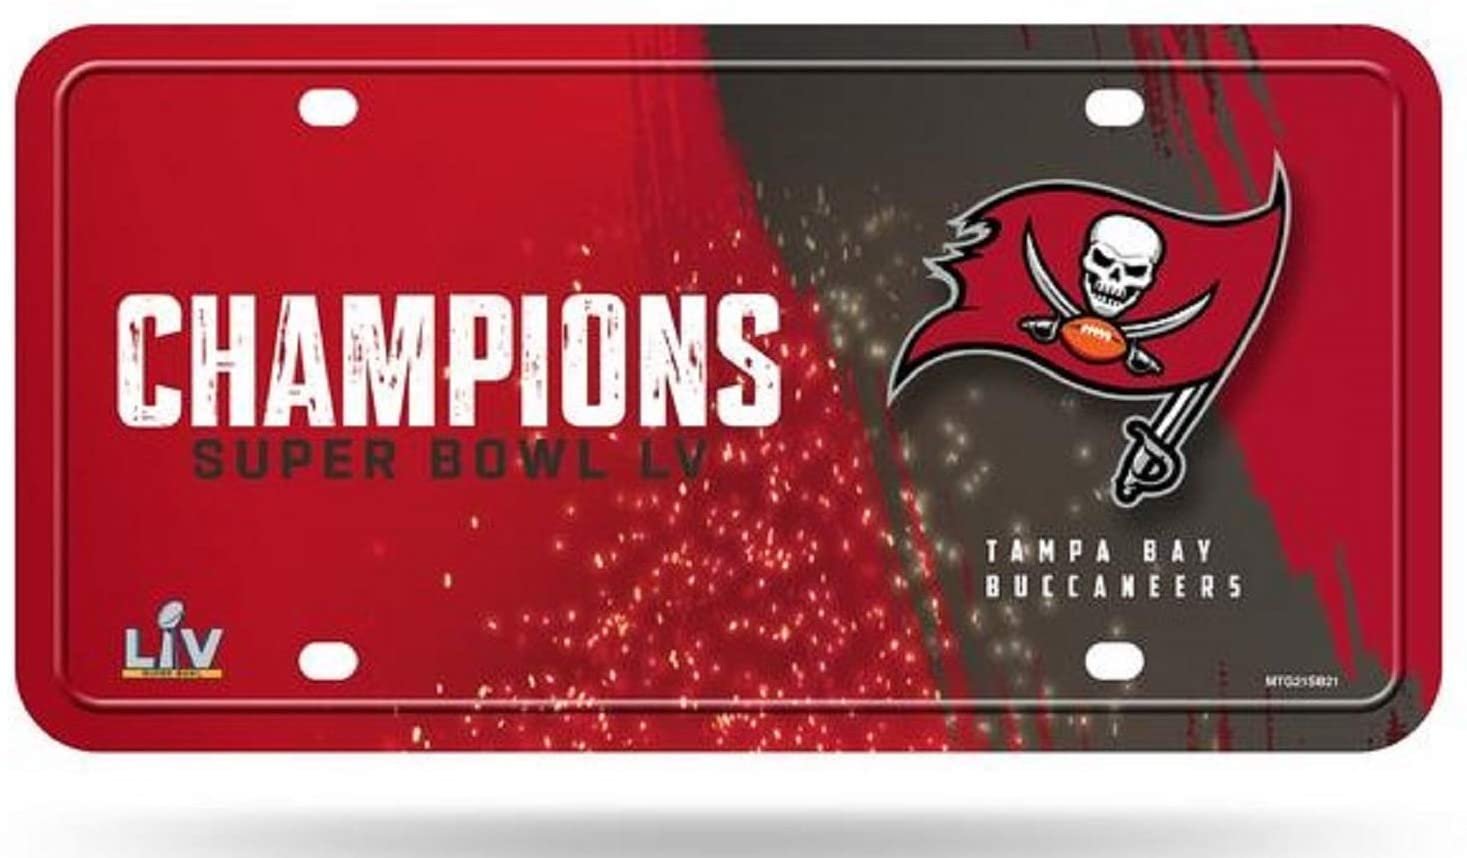 Tampa Bay Buccaneers Metal Auto Tag License Plate, 2021 Super Bowl LV Champions, 12x6 Inch